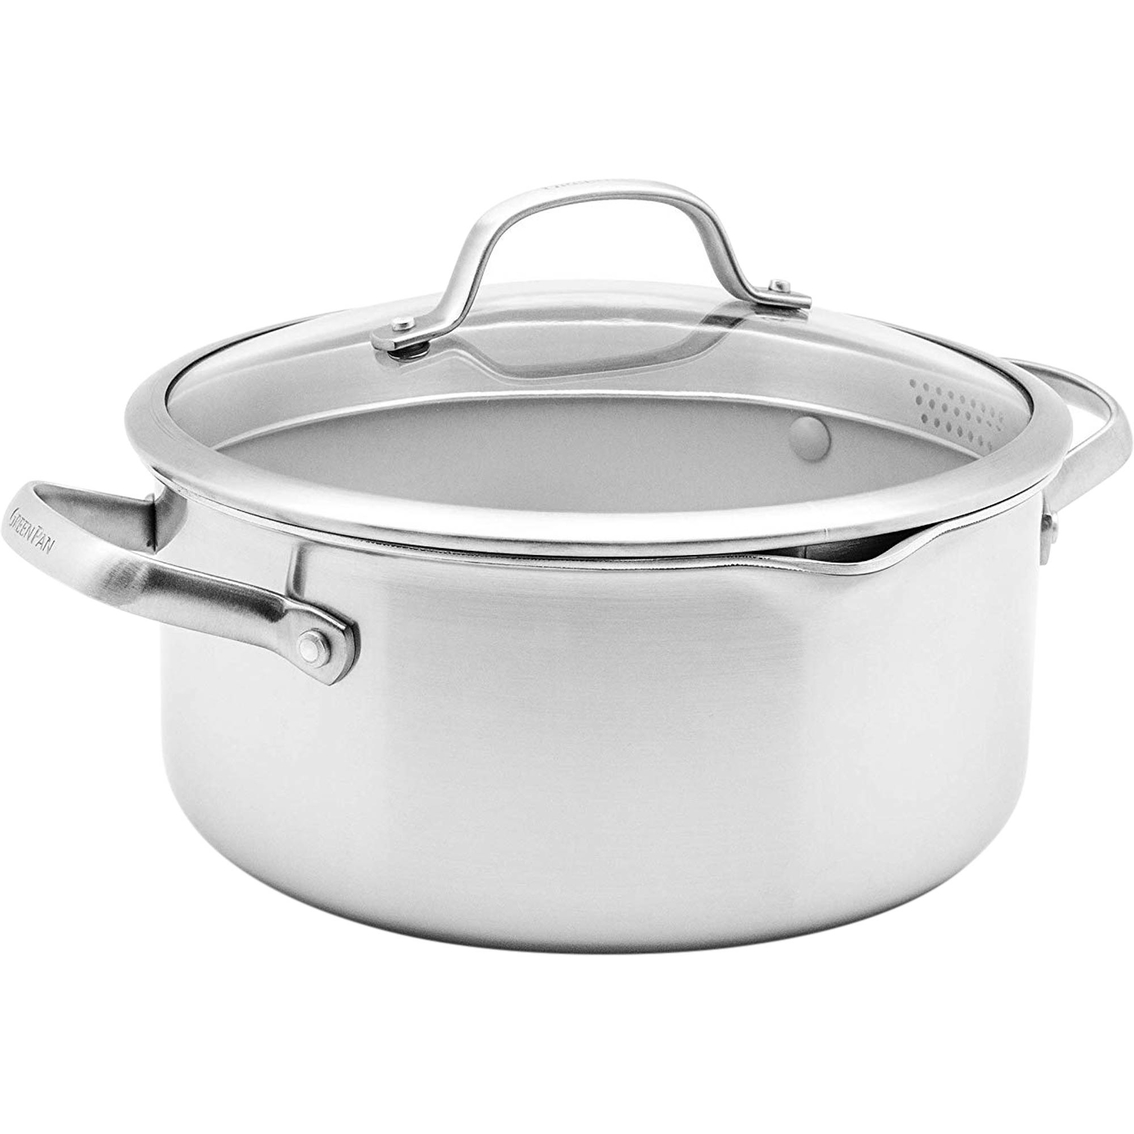 Greenpan Venice Pro 8qt Stockpot W/ Straining Lid And Stainless